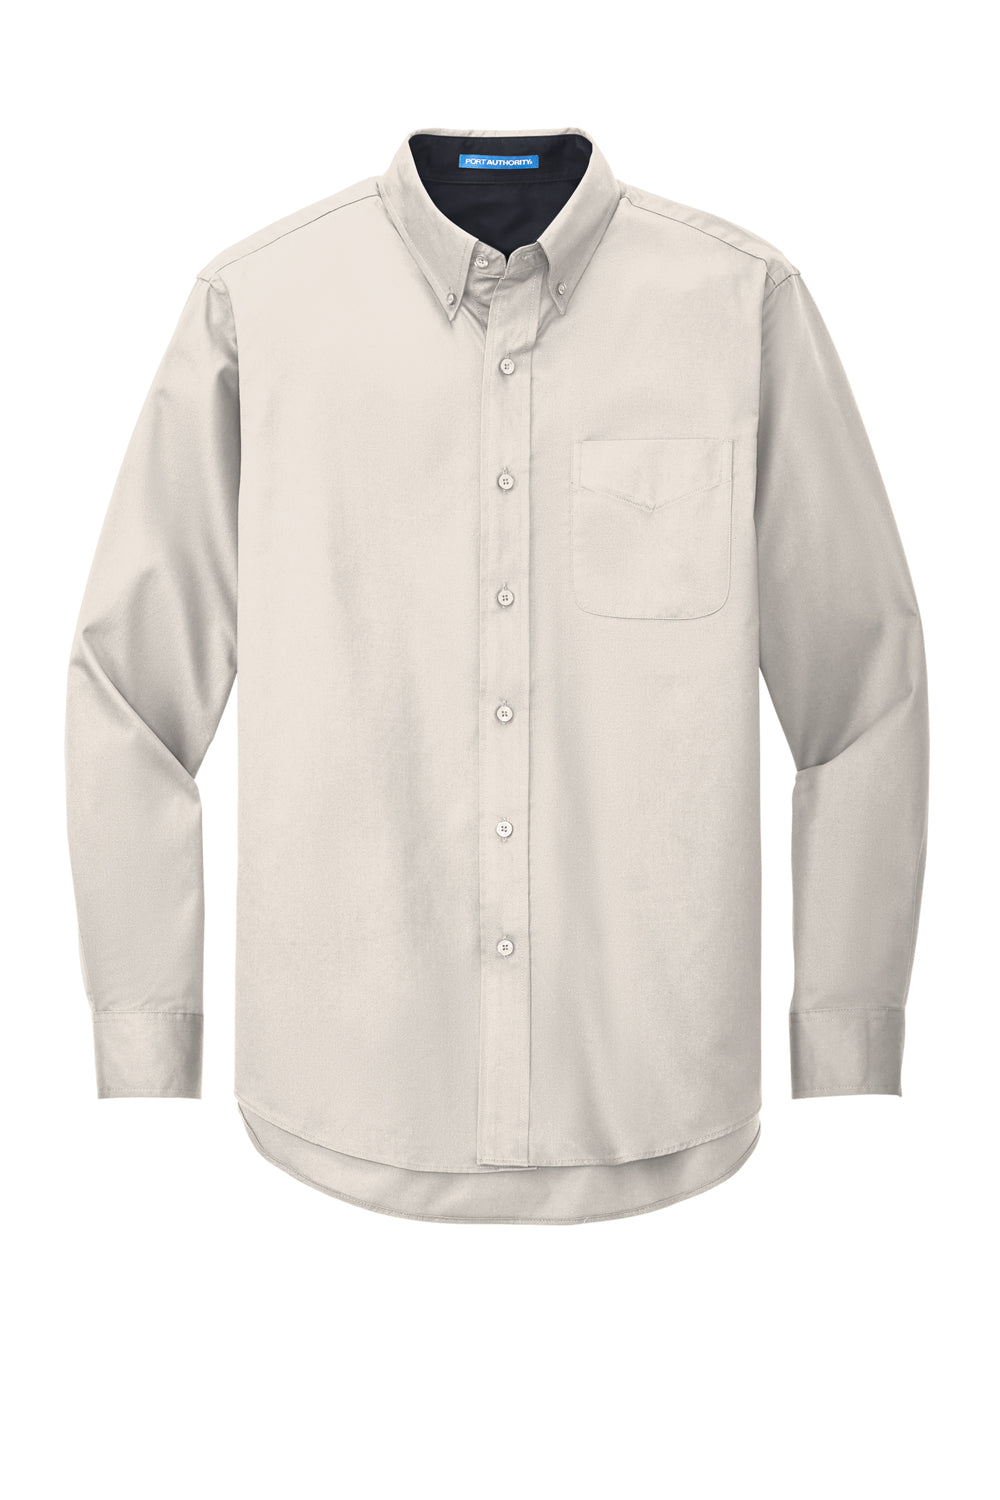 Port Authority S608/TLS608/S608ES Mens Easy Care Wrinkle Resistant Long Sleeve Button Down Shirt w/ Pocket Light Stone Flat Front